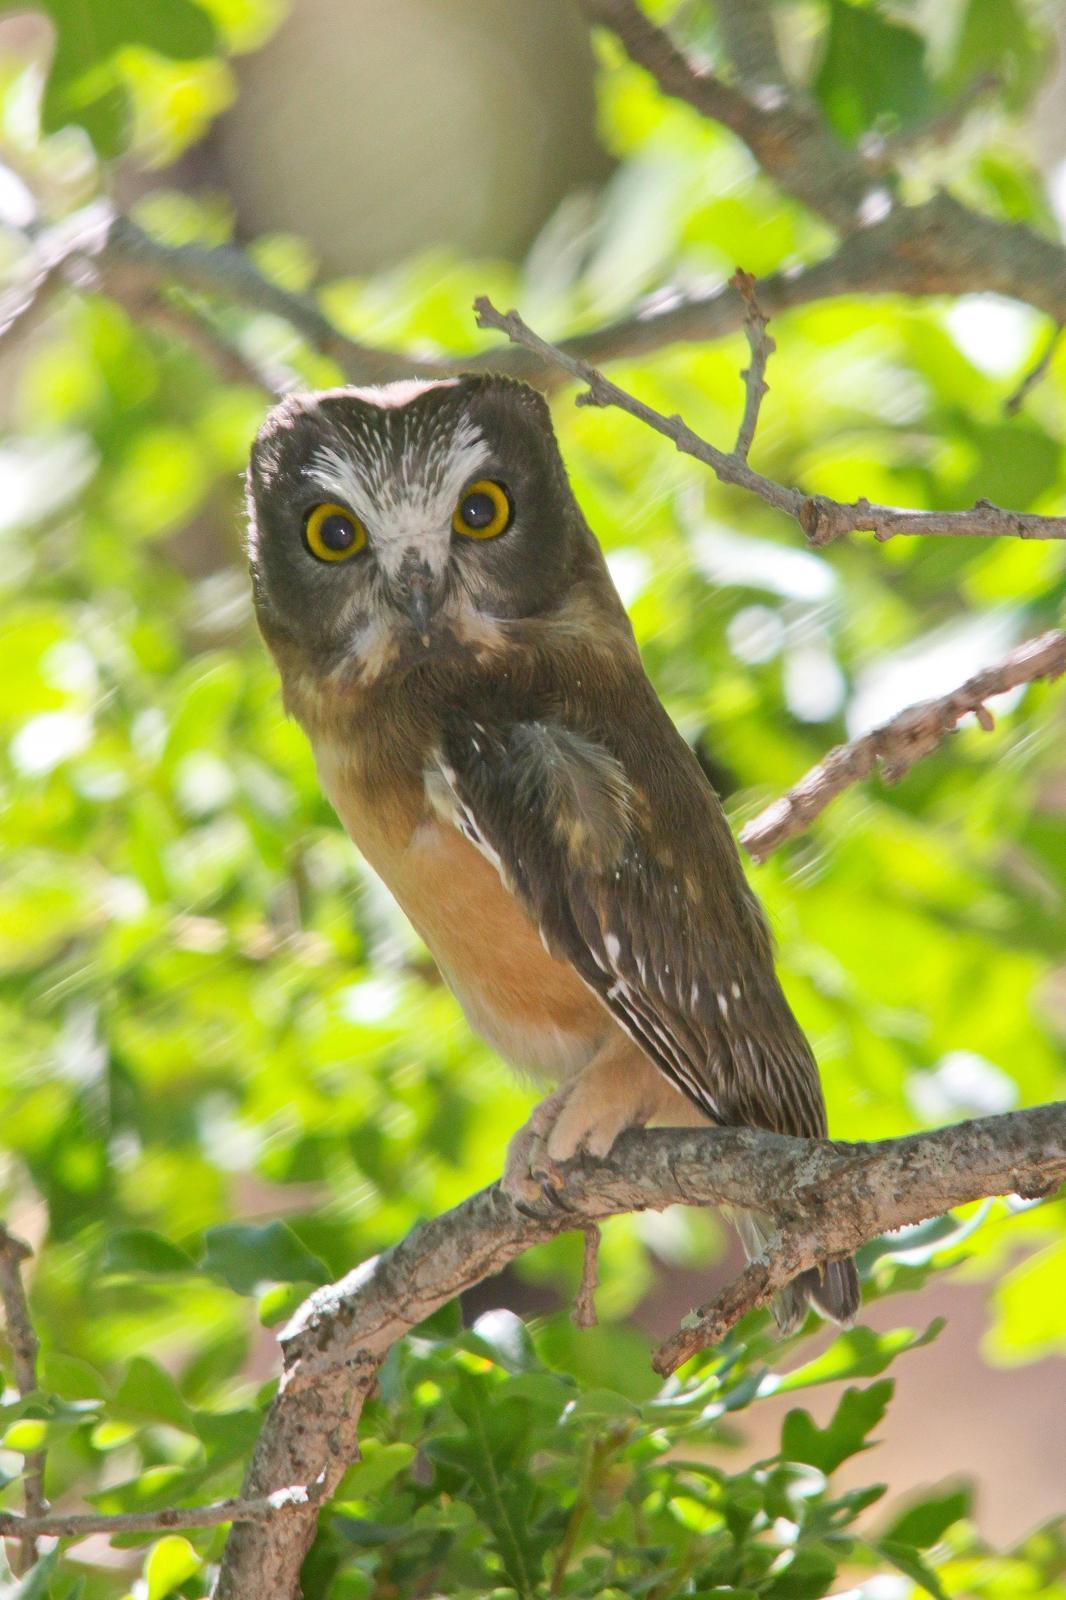 Northern Saw-whet Owl Photo by Tom Ford-Hutchinson